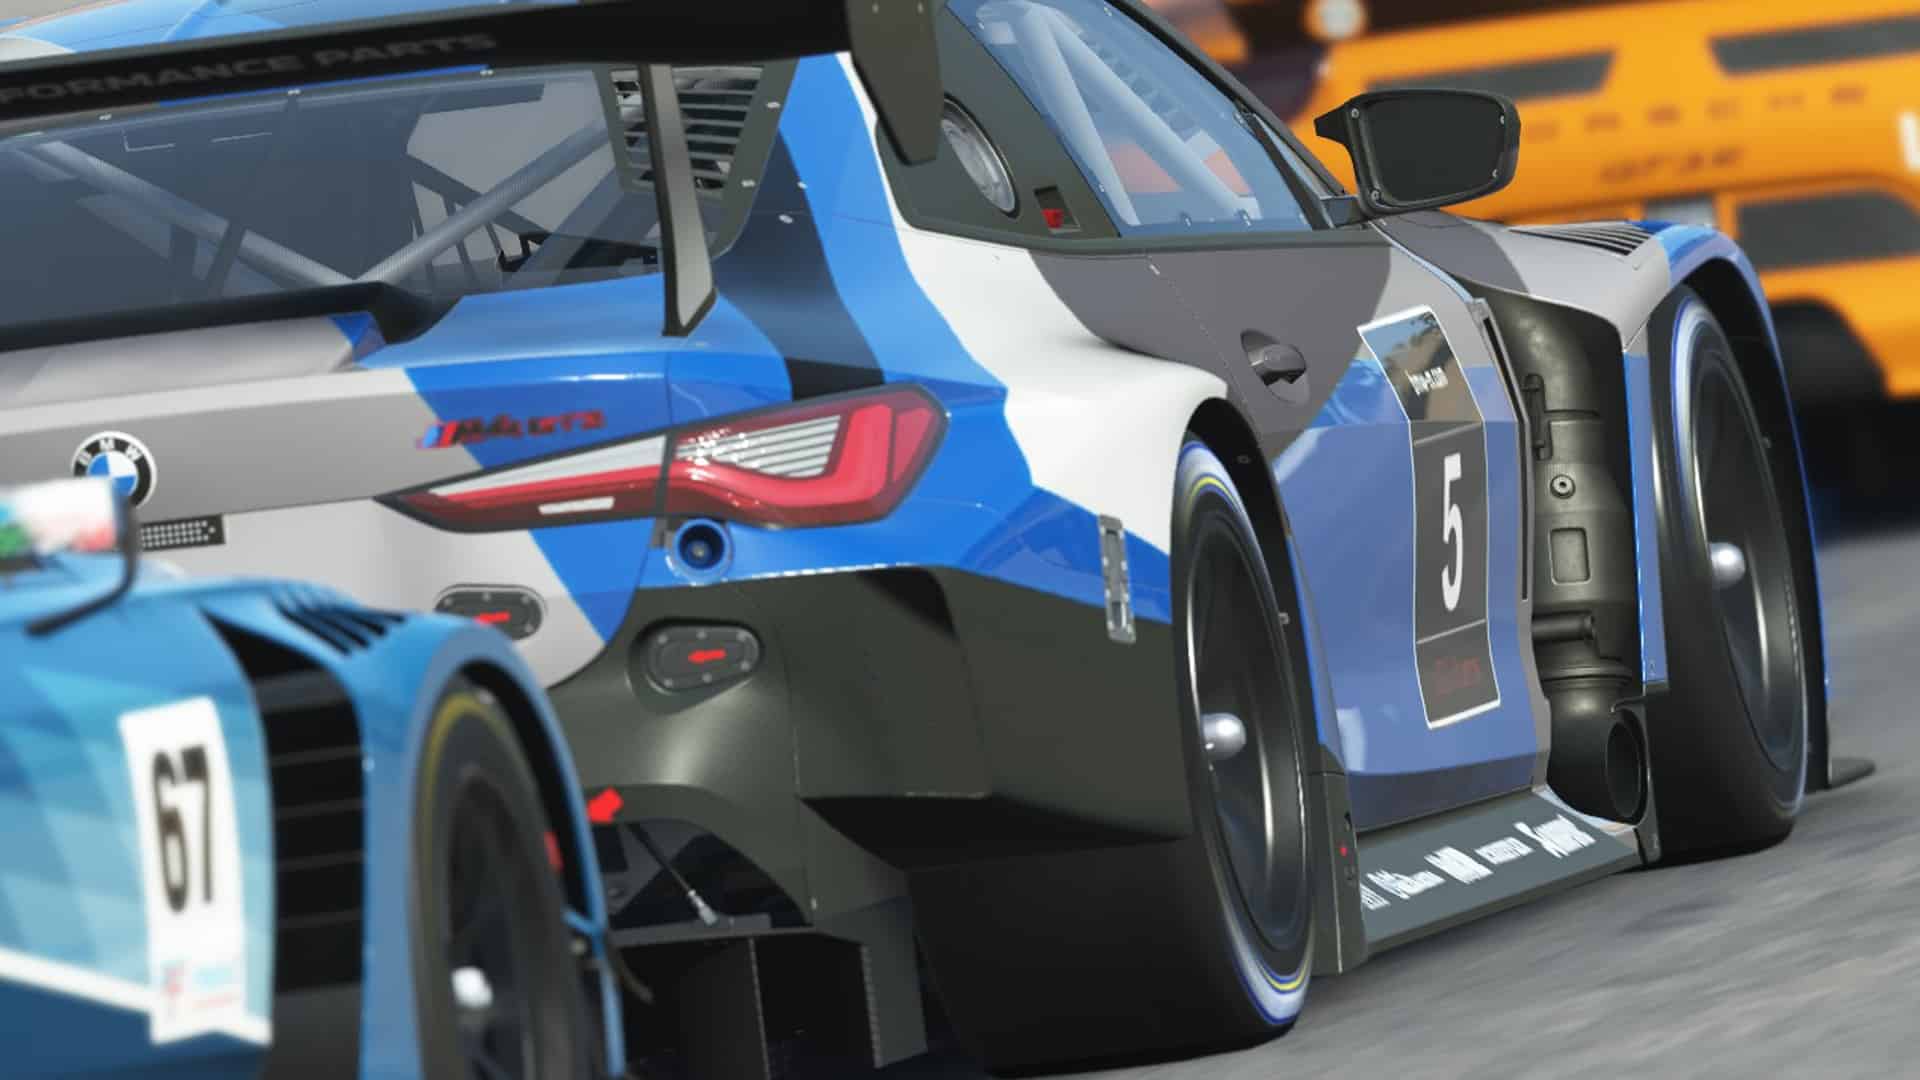 Assetto Corsa 2 Release Date Window Revealed, Likely Arriving Before Gran  Turismo 8 - PlayStation LifeStyle